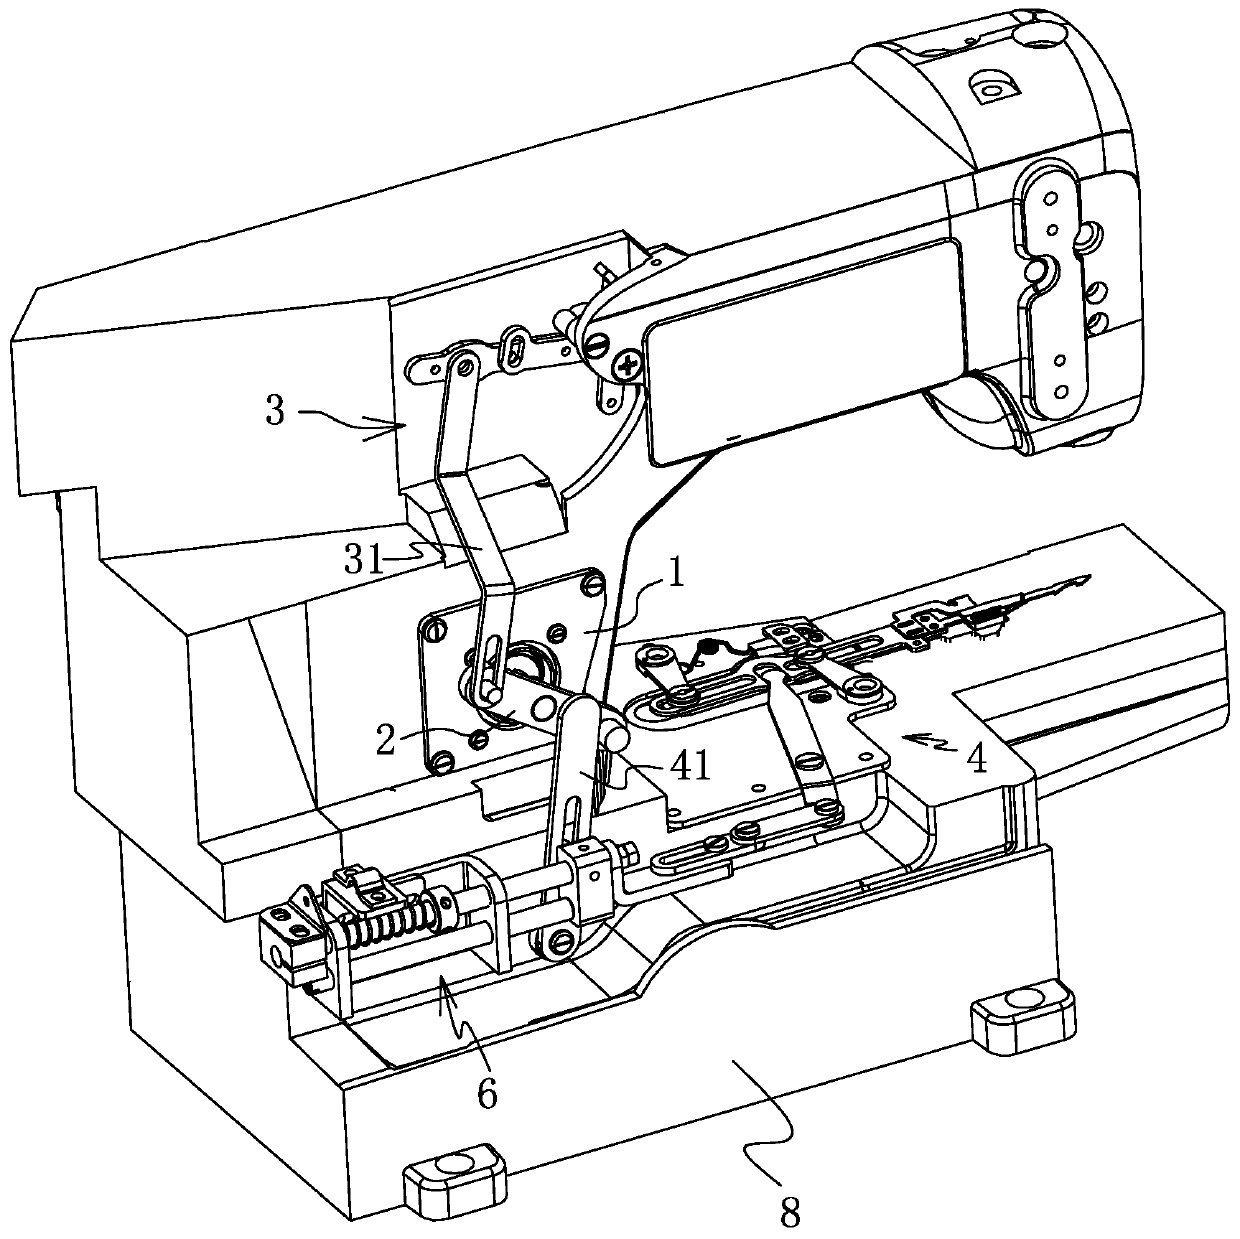 Thread trimming and presser foot lifting mechanism and sewing machine